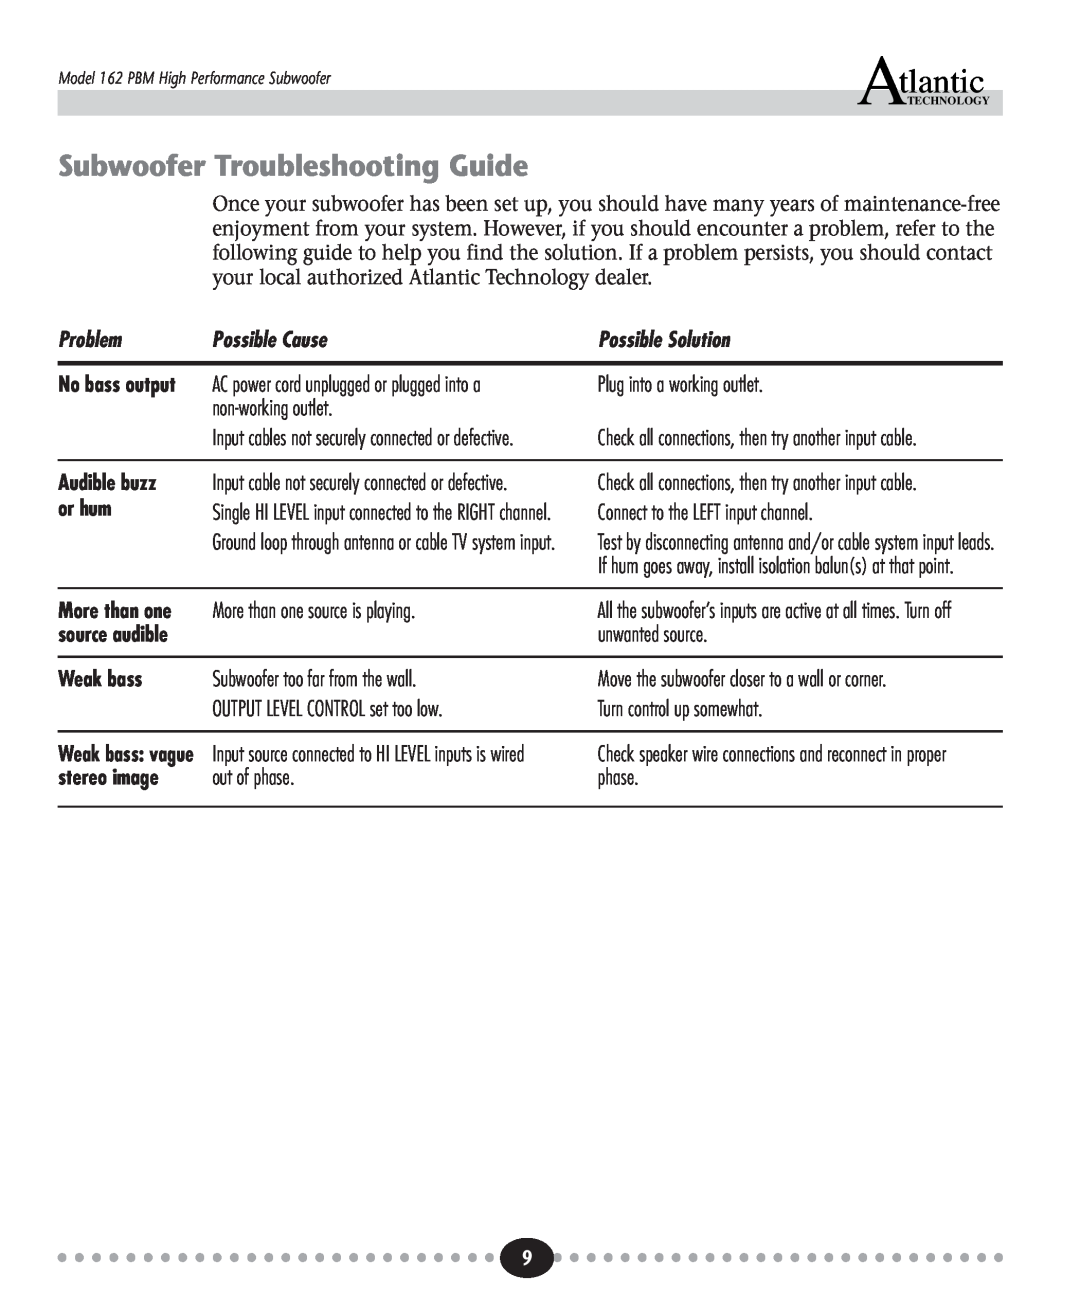 Atlantic Technology 162 PBM Subwoofer Troubleshooting Guide, tlantic, Problem, Possible Cause, Possible Solution 